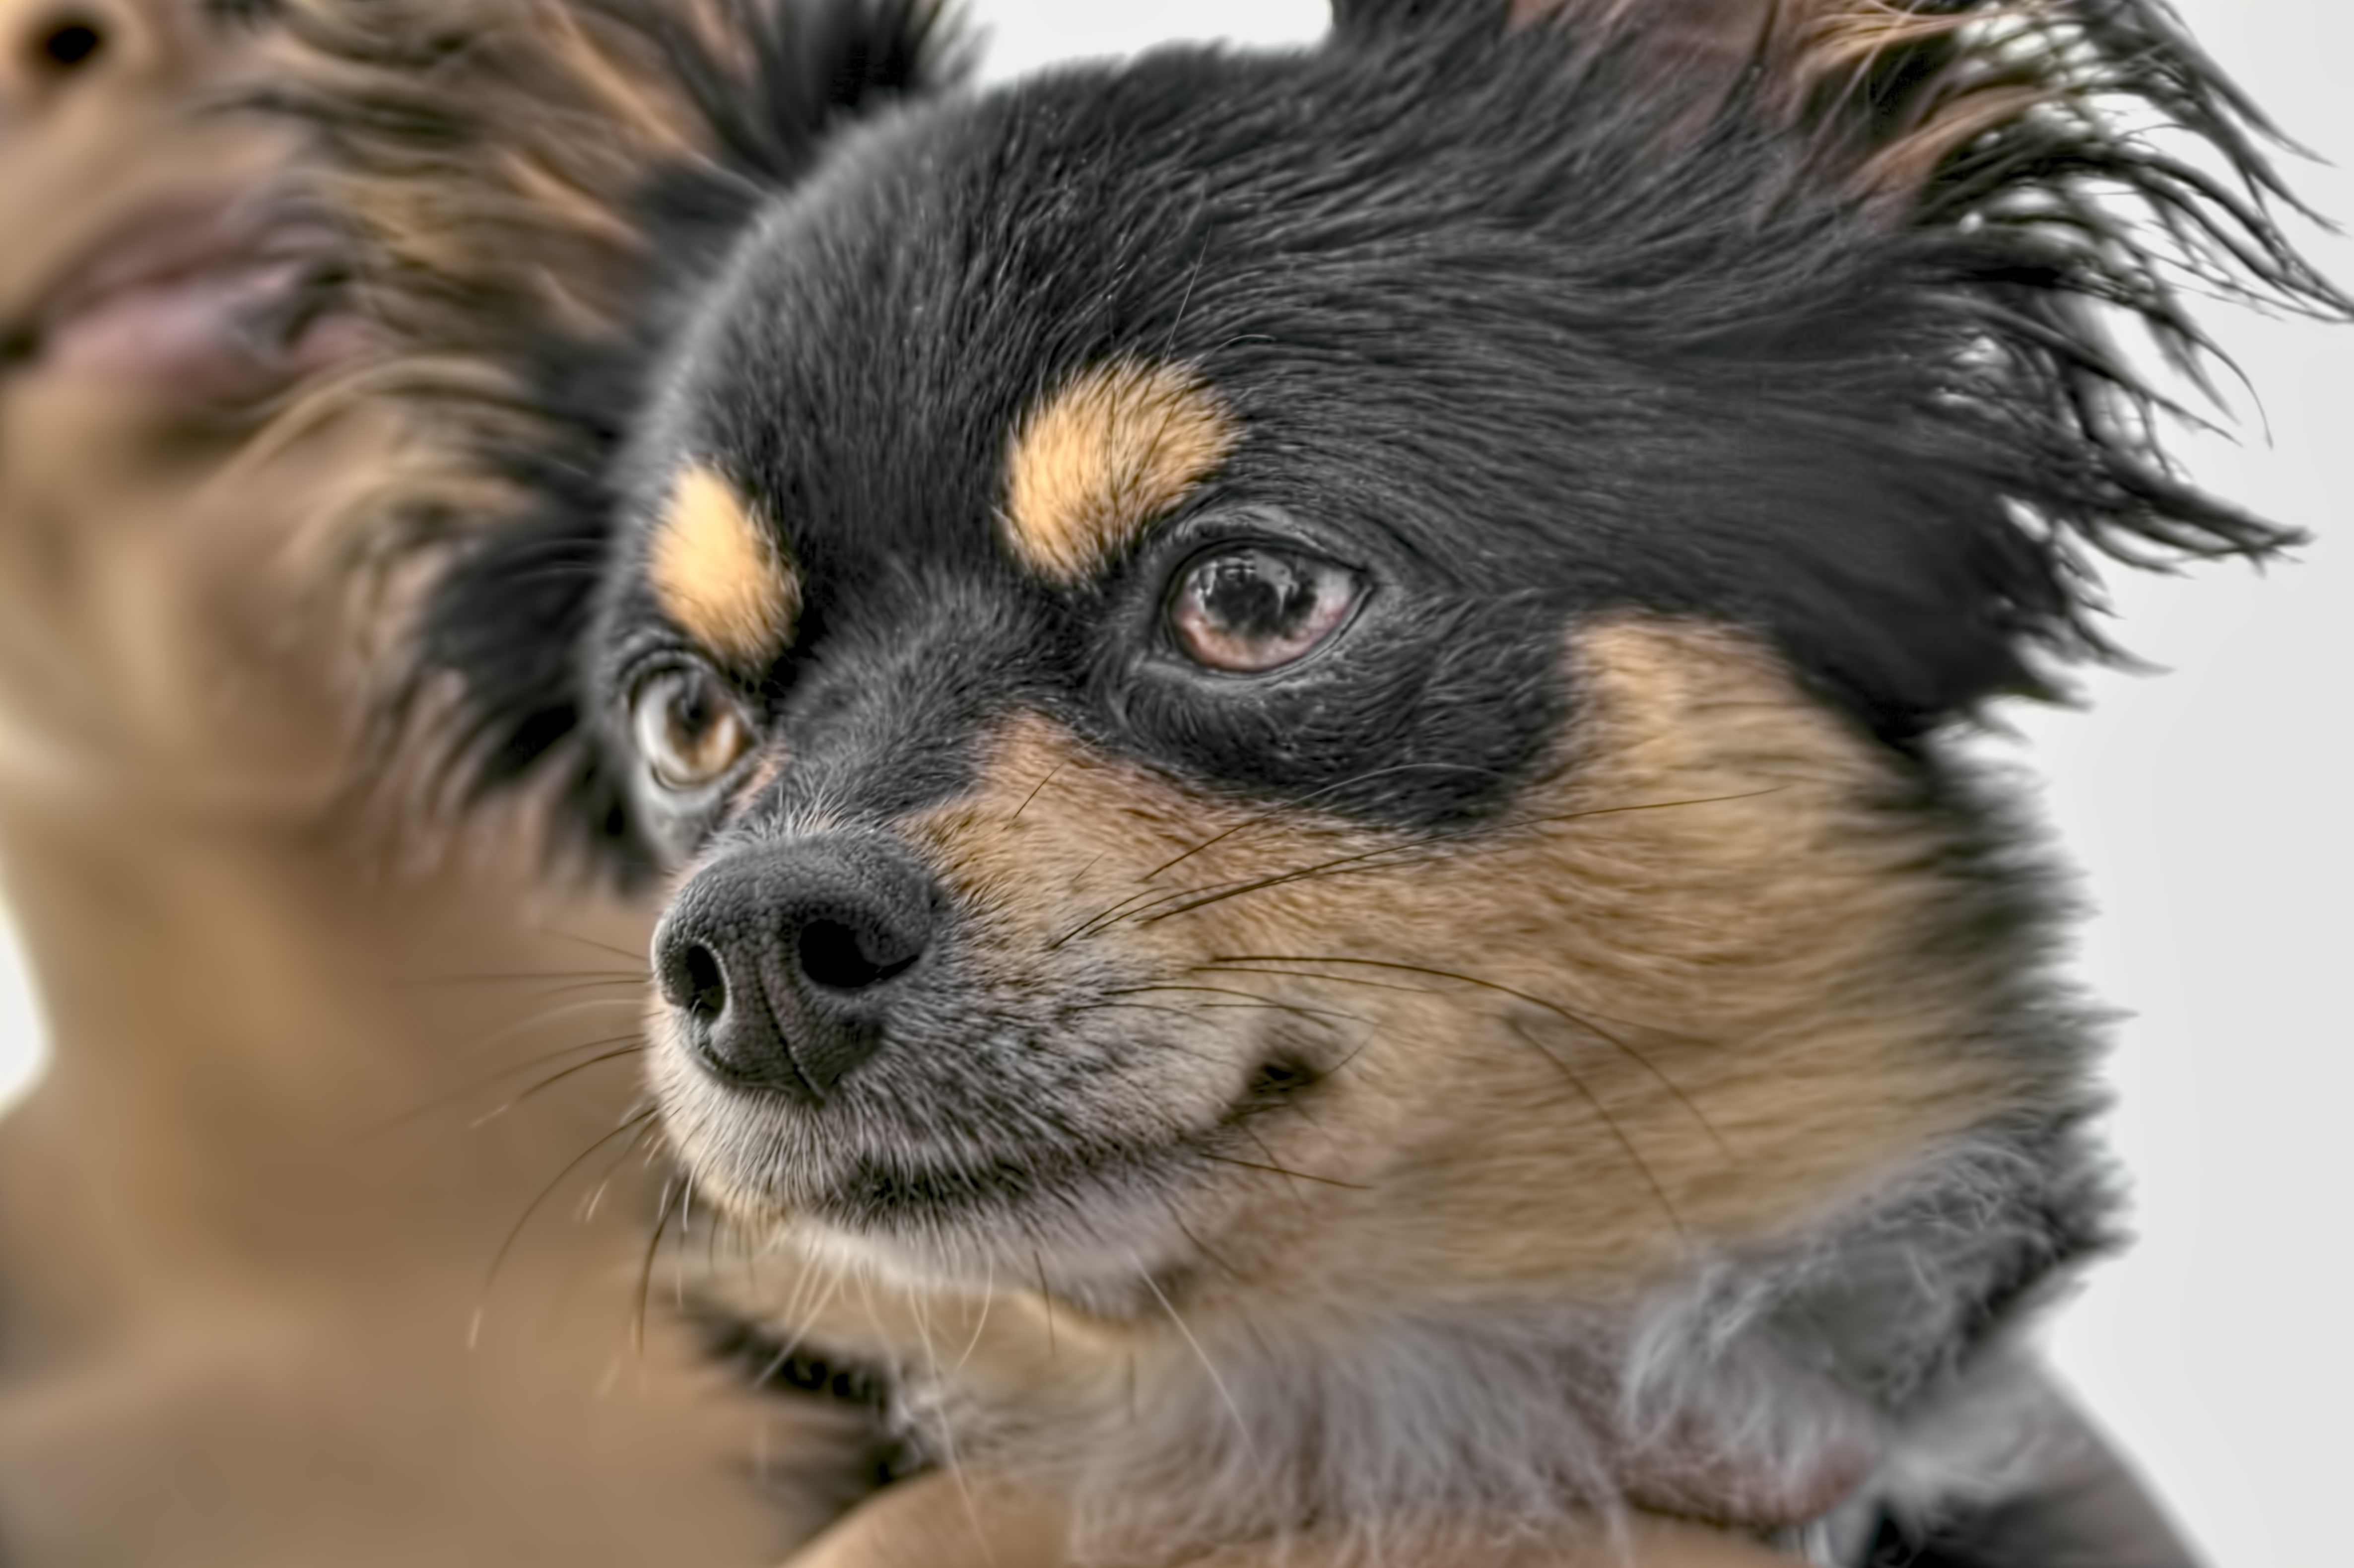 Six months old Affenhuahua is a small dog. It is a cross between the Affenpinscher and the Chihuahua.